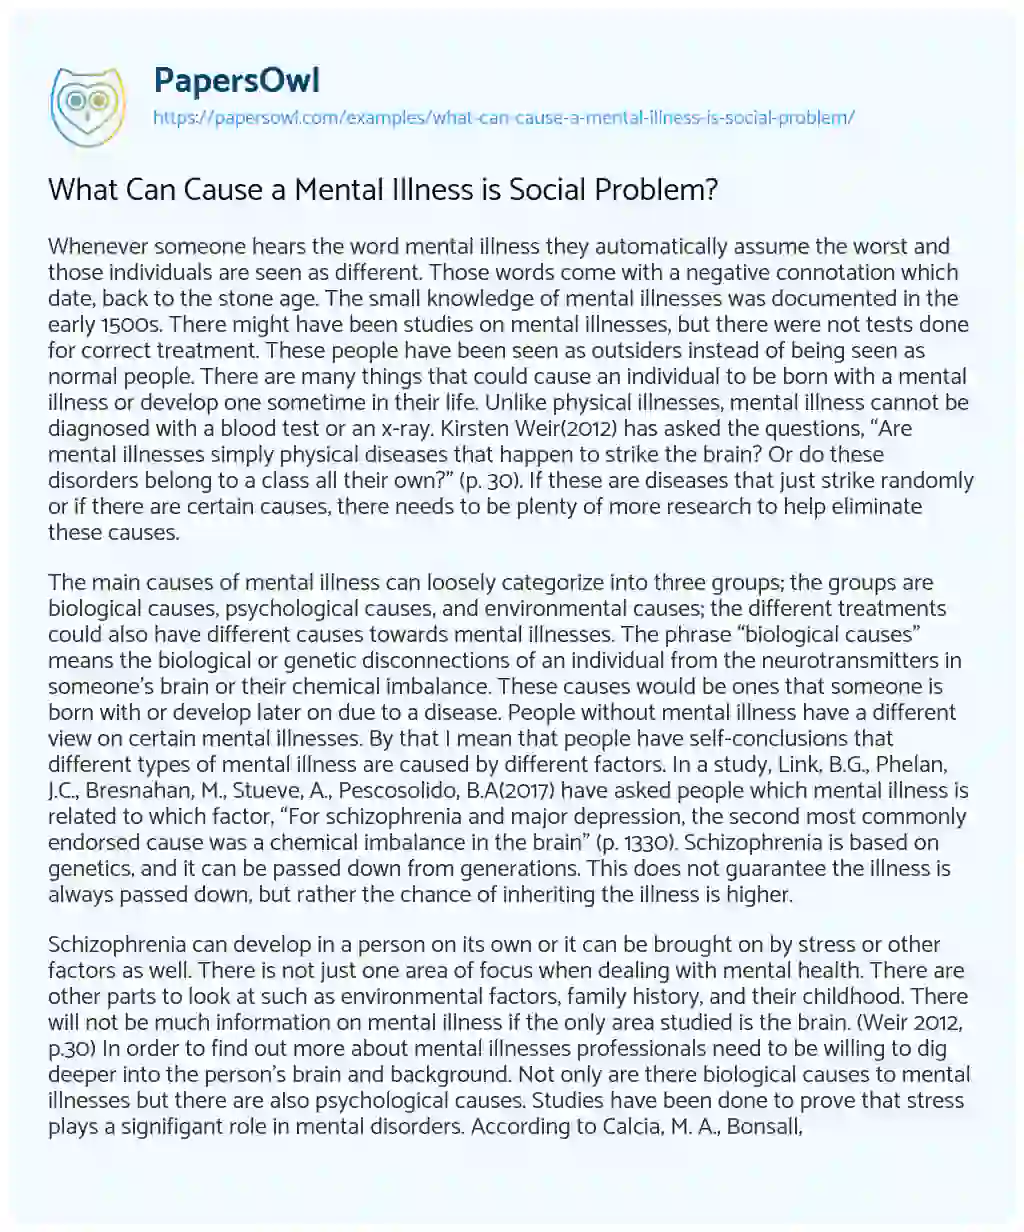 Essay on What Can Cause a Mental Illness is Social Problem?